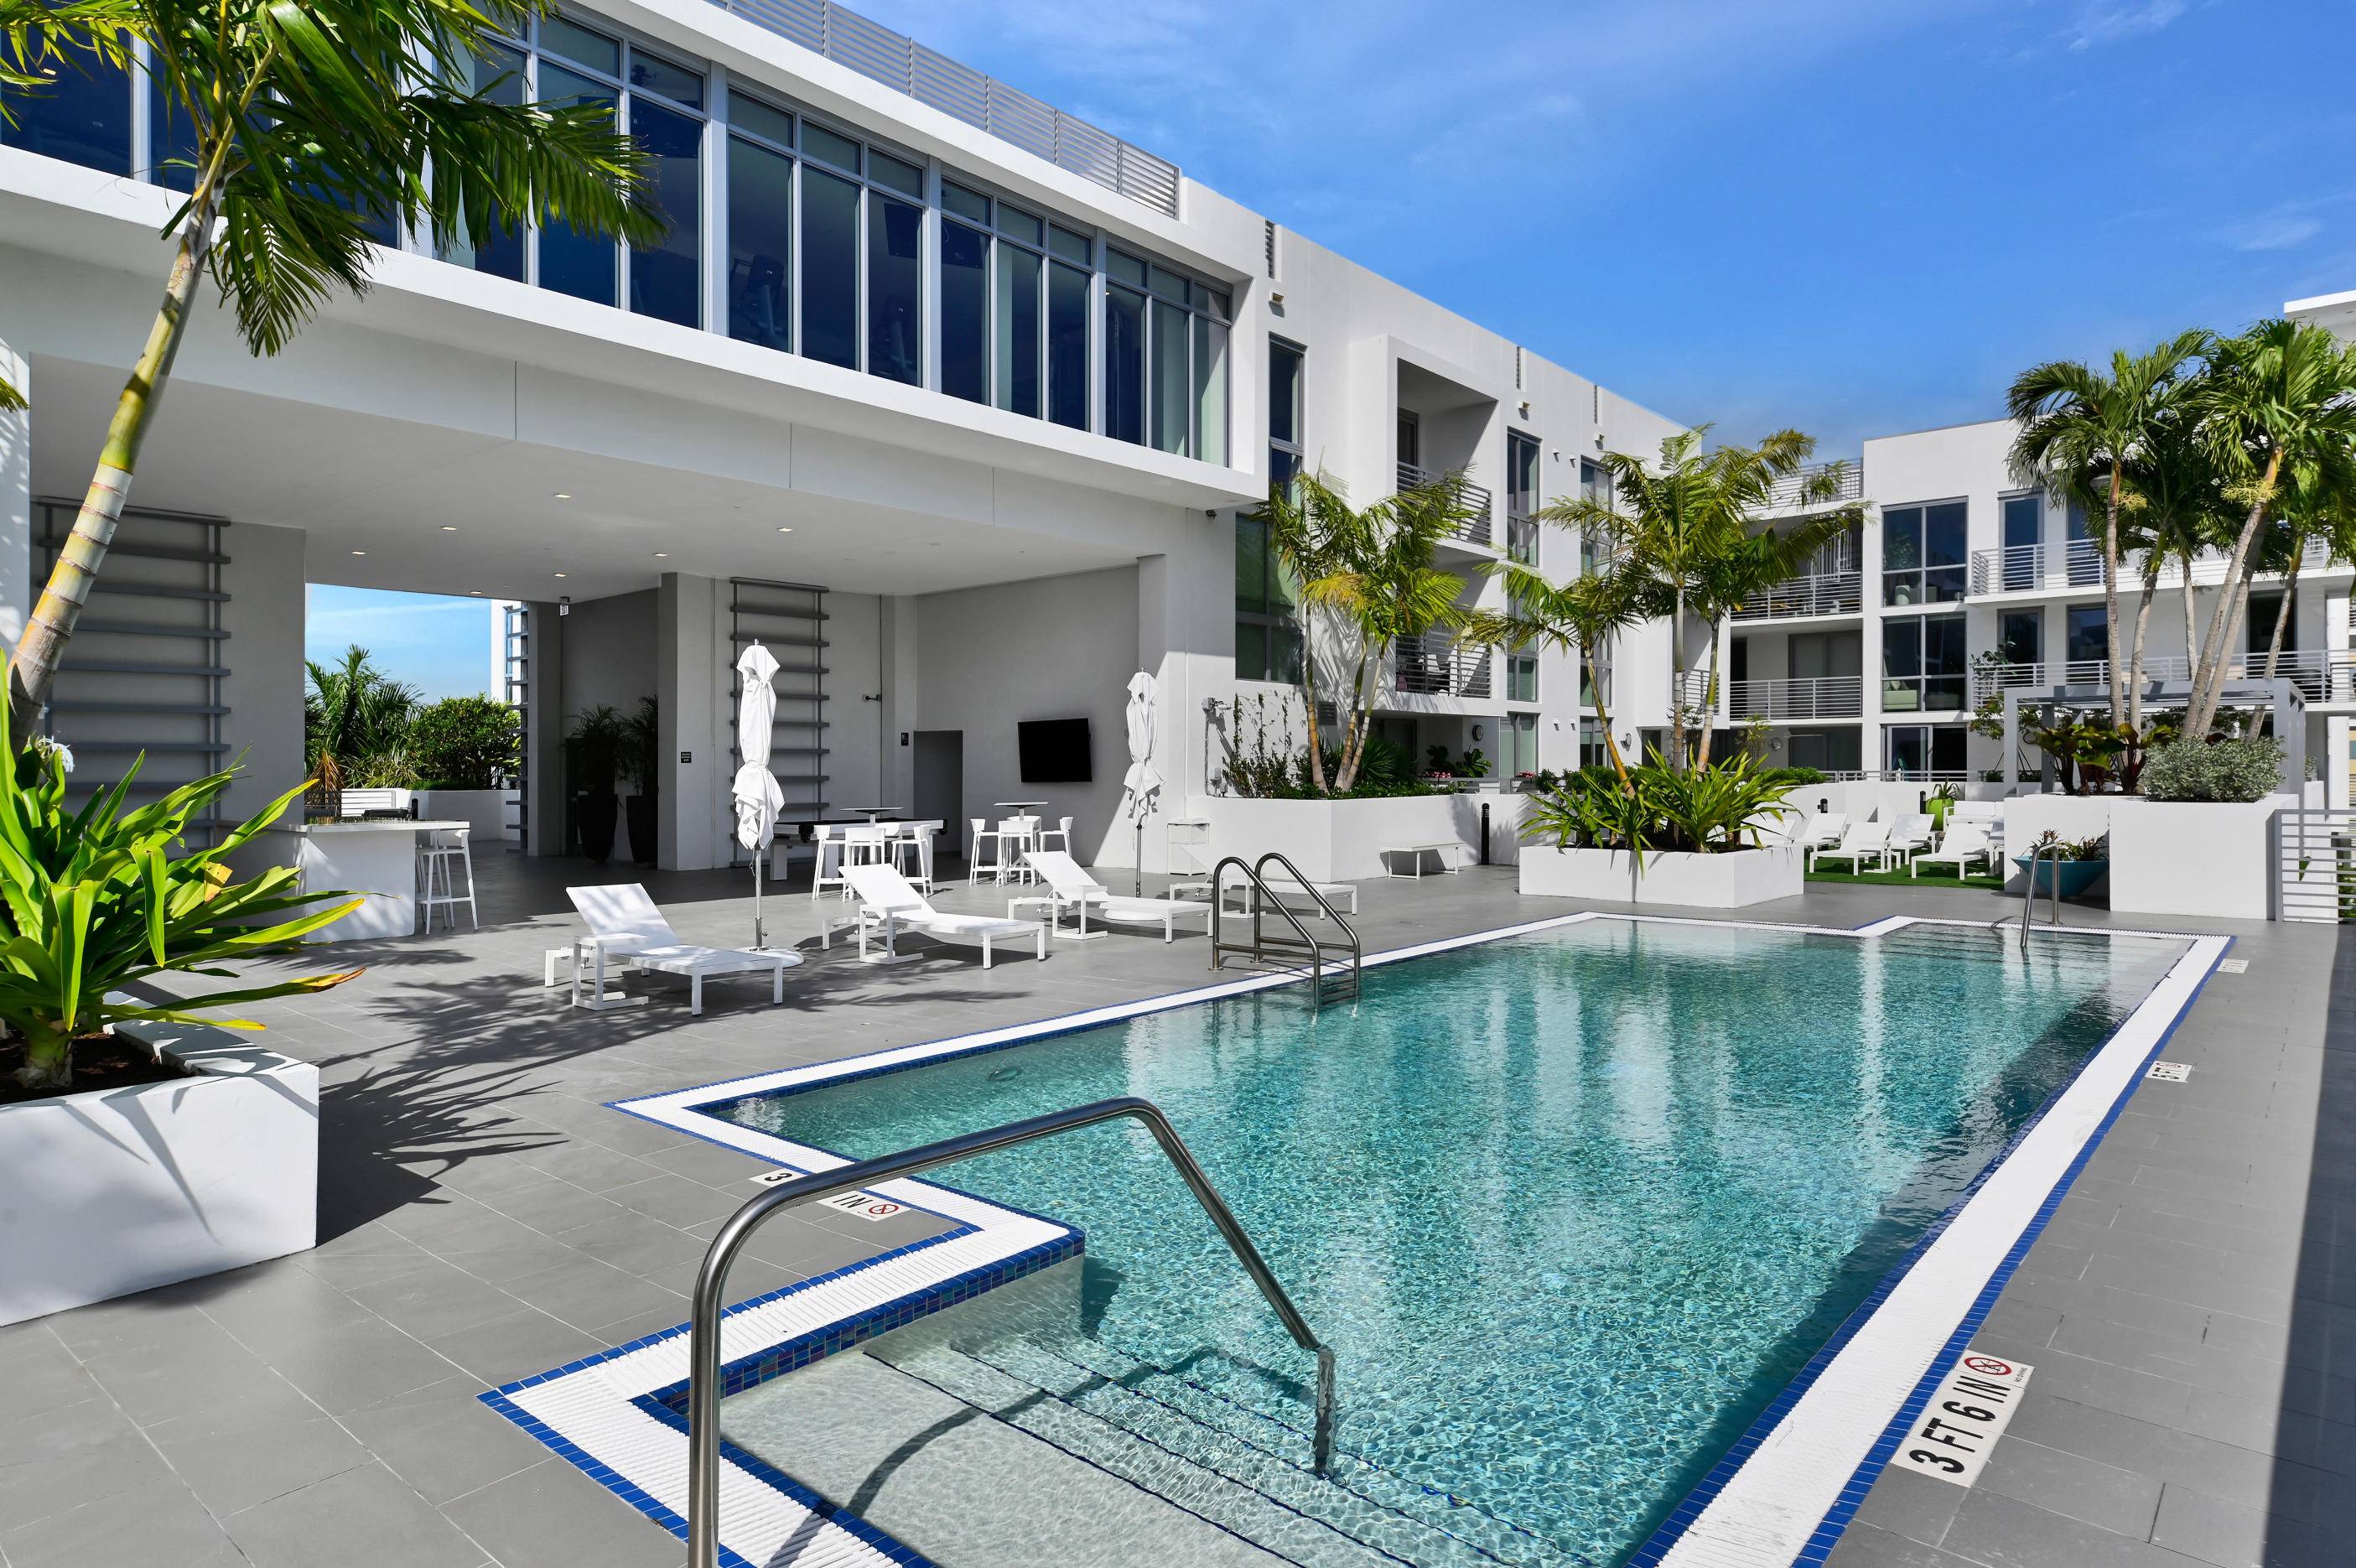 Experience luxurious urban living in the heart of downtown Delray Beach at 111 First Delray.